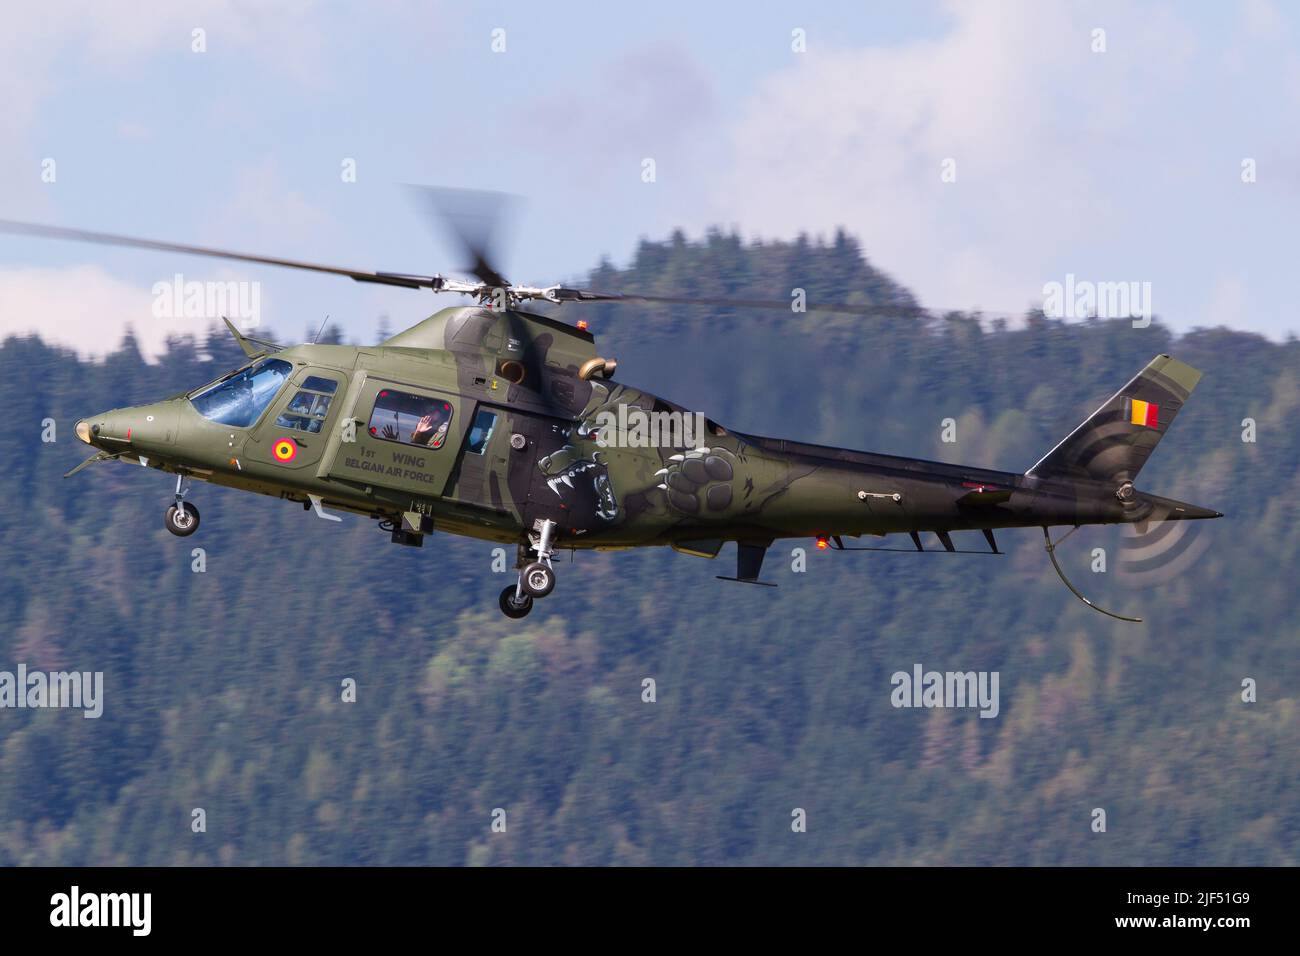 A Belgian Air Force A109 combat helicopter coming in for landing Stock Photo